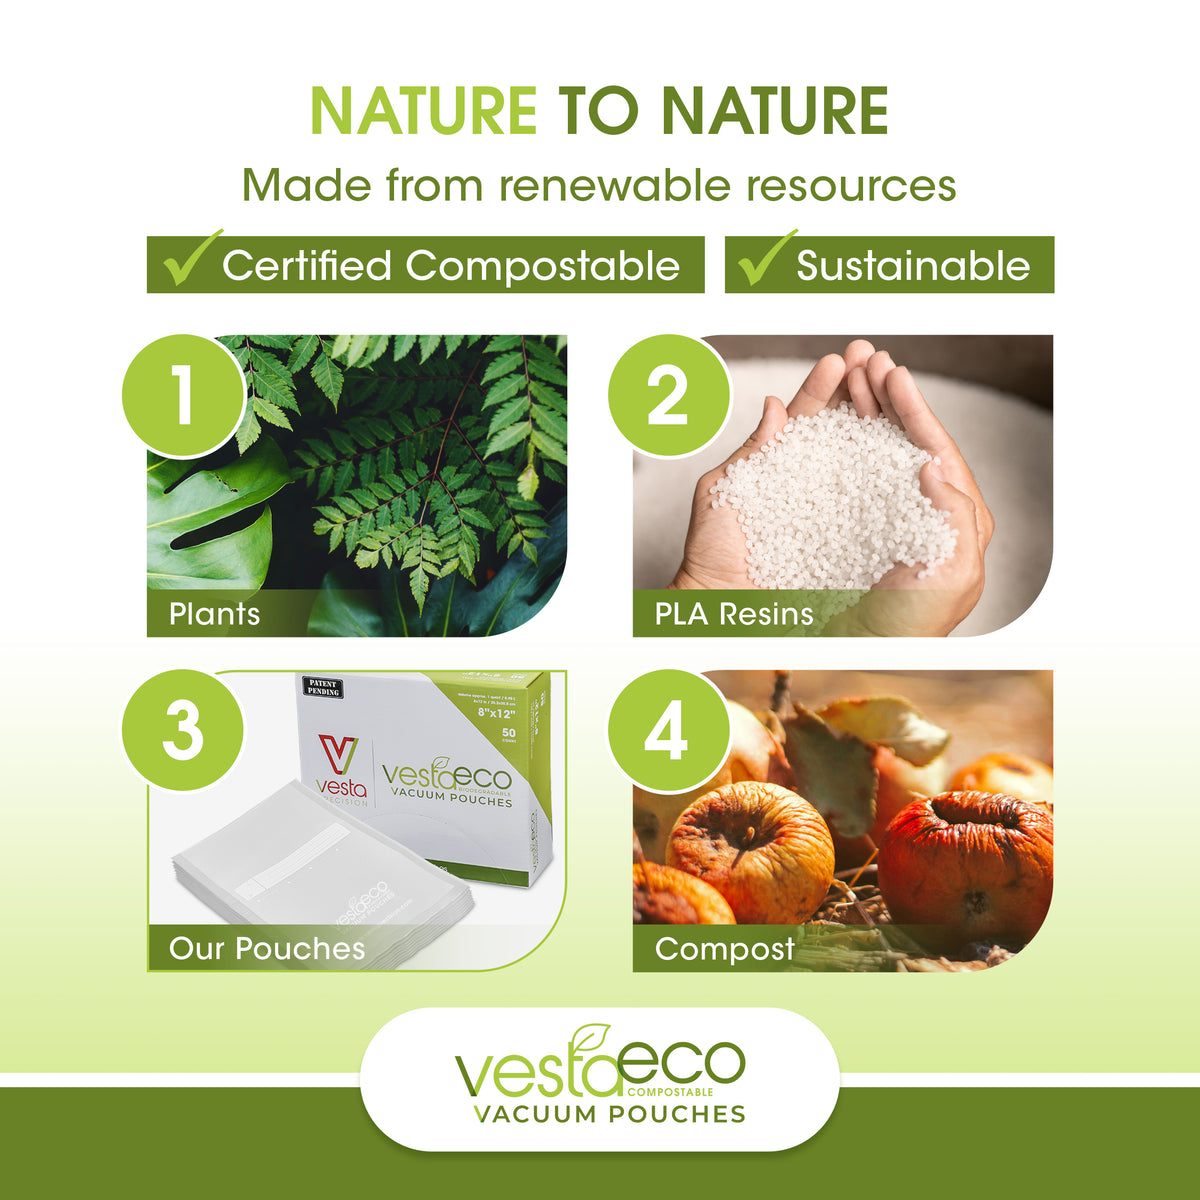 An infographic that shows how certified compostable VestaEco bags and rolls come from plants to PLA resin to the VestaEco certified commercially compostable flat chamber vacuum seal bags and then to compost.